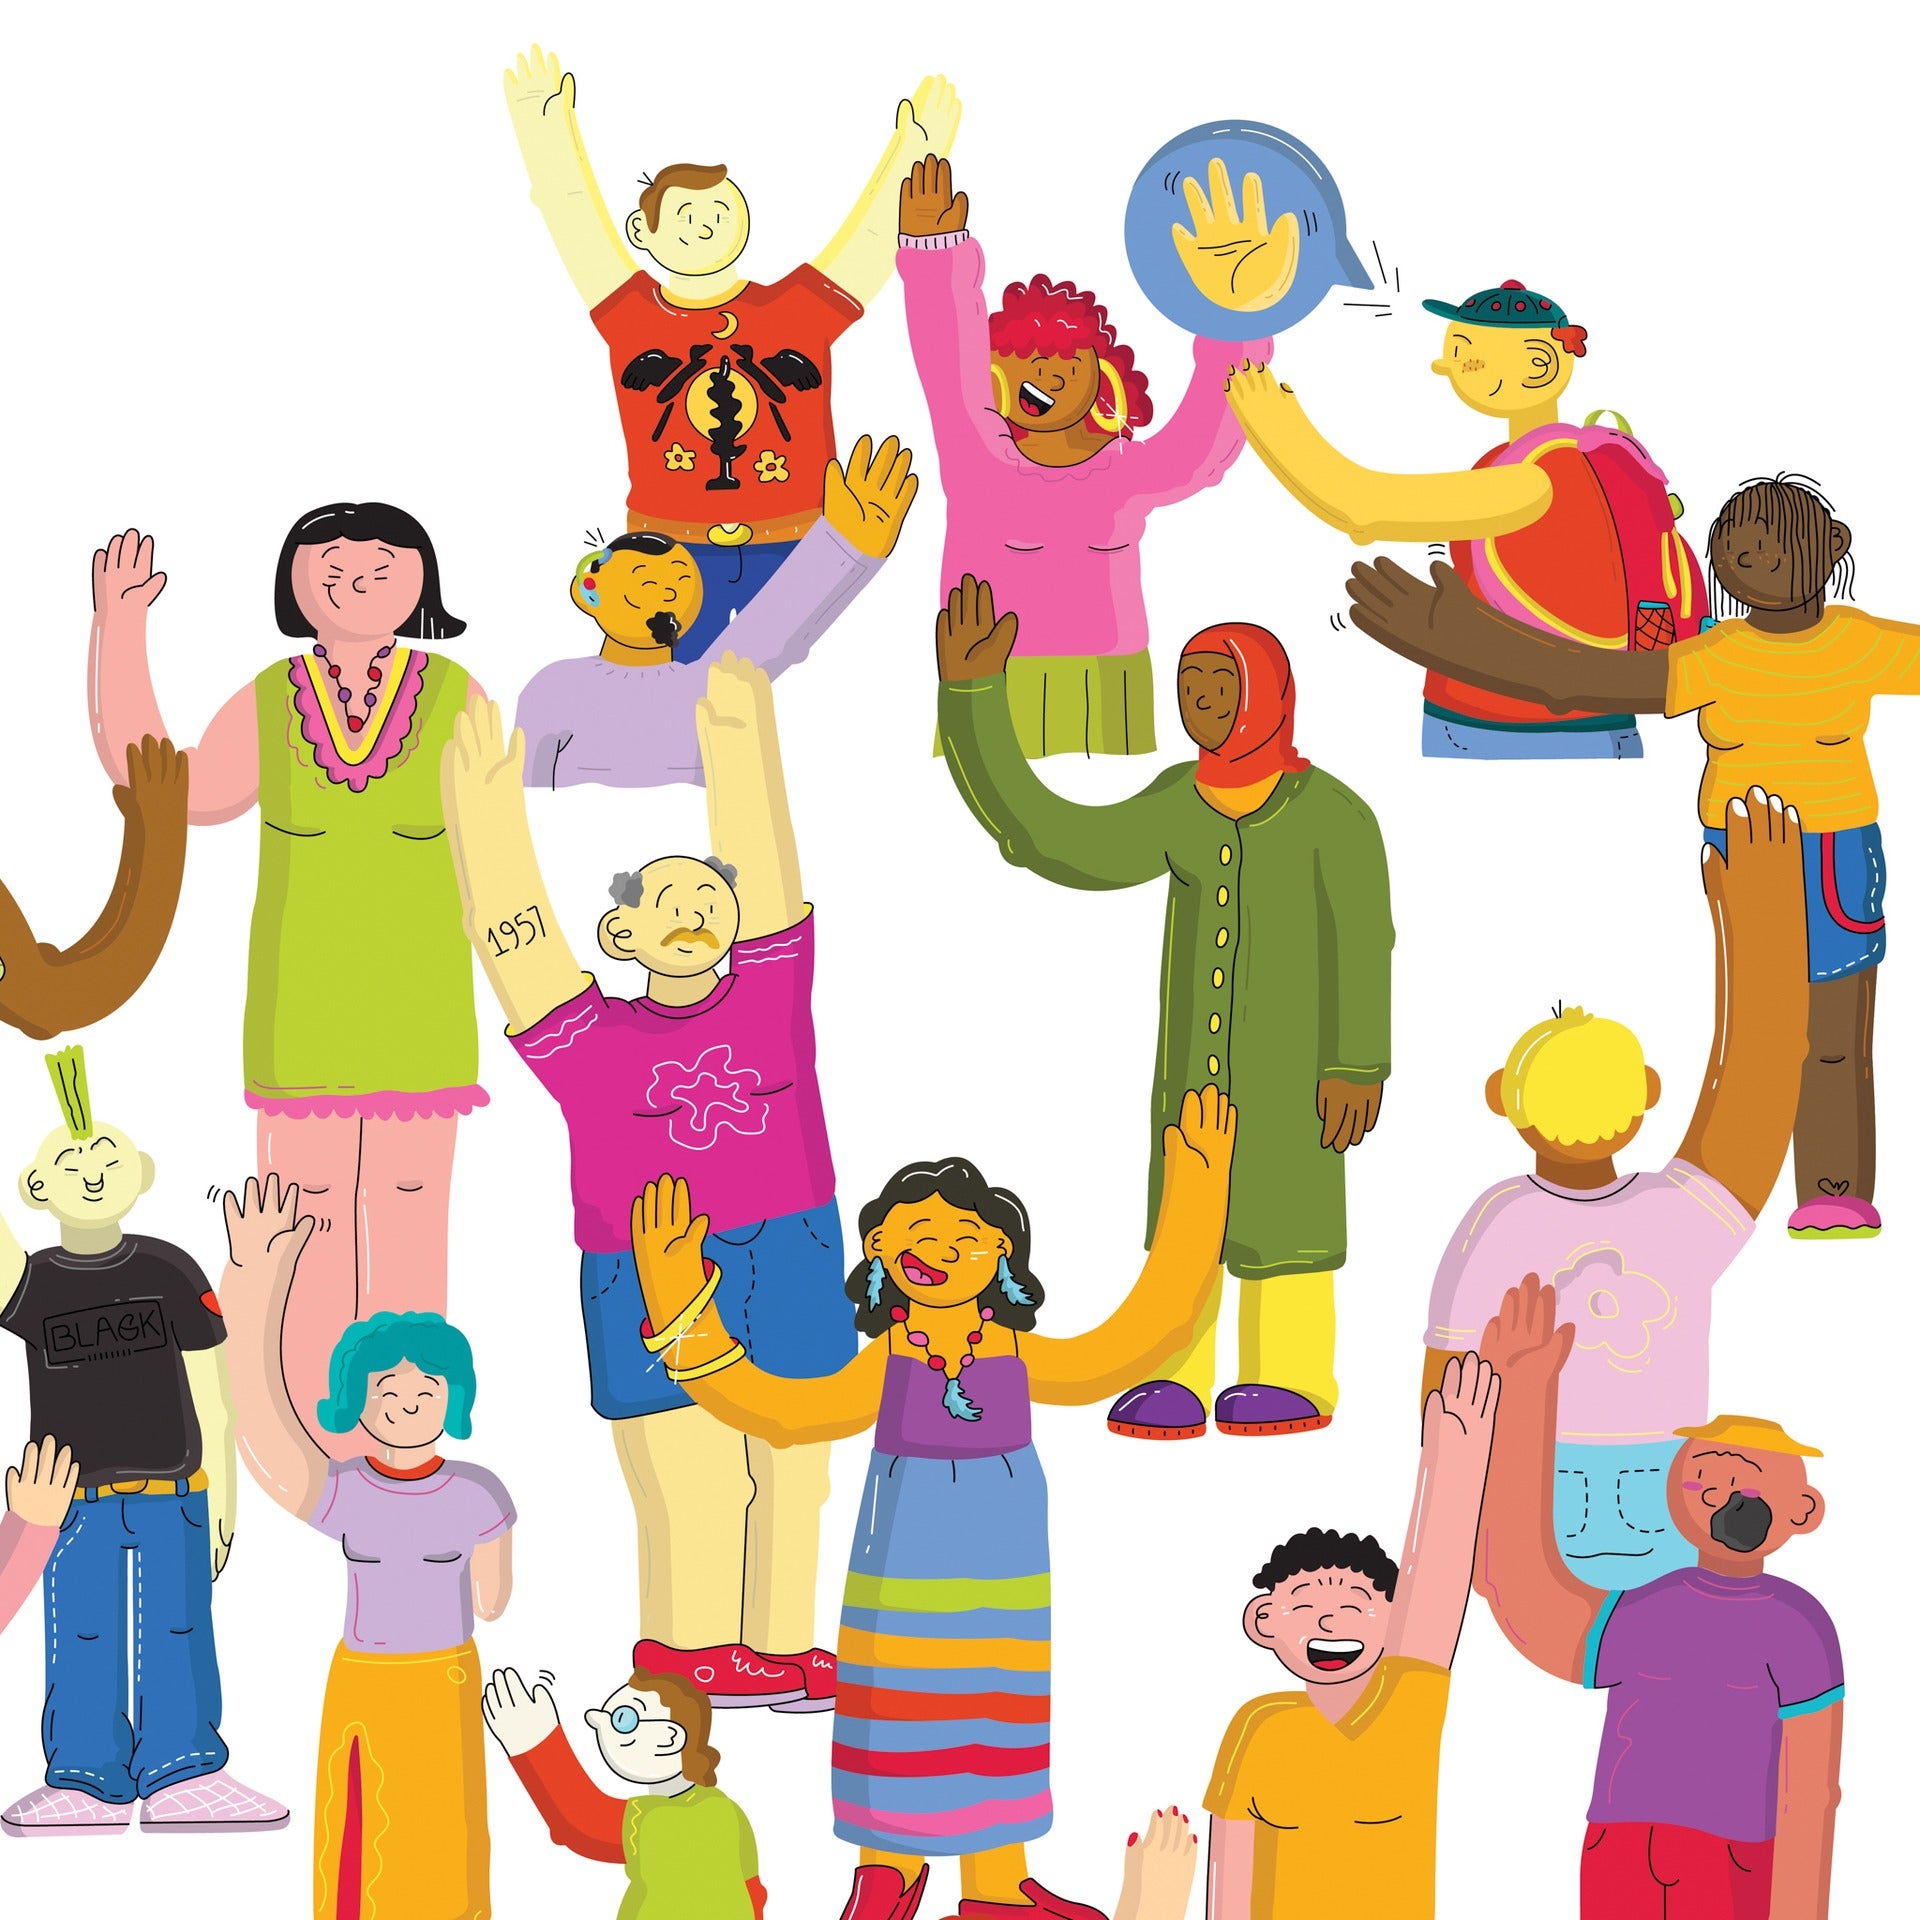 Illustration graphic of diverse folks waving to each other